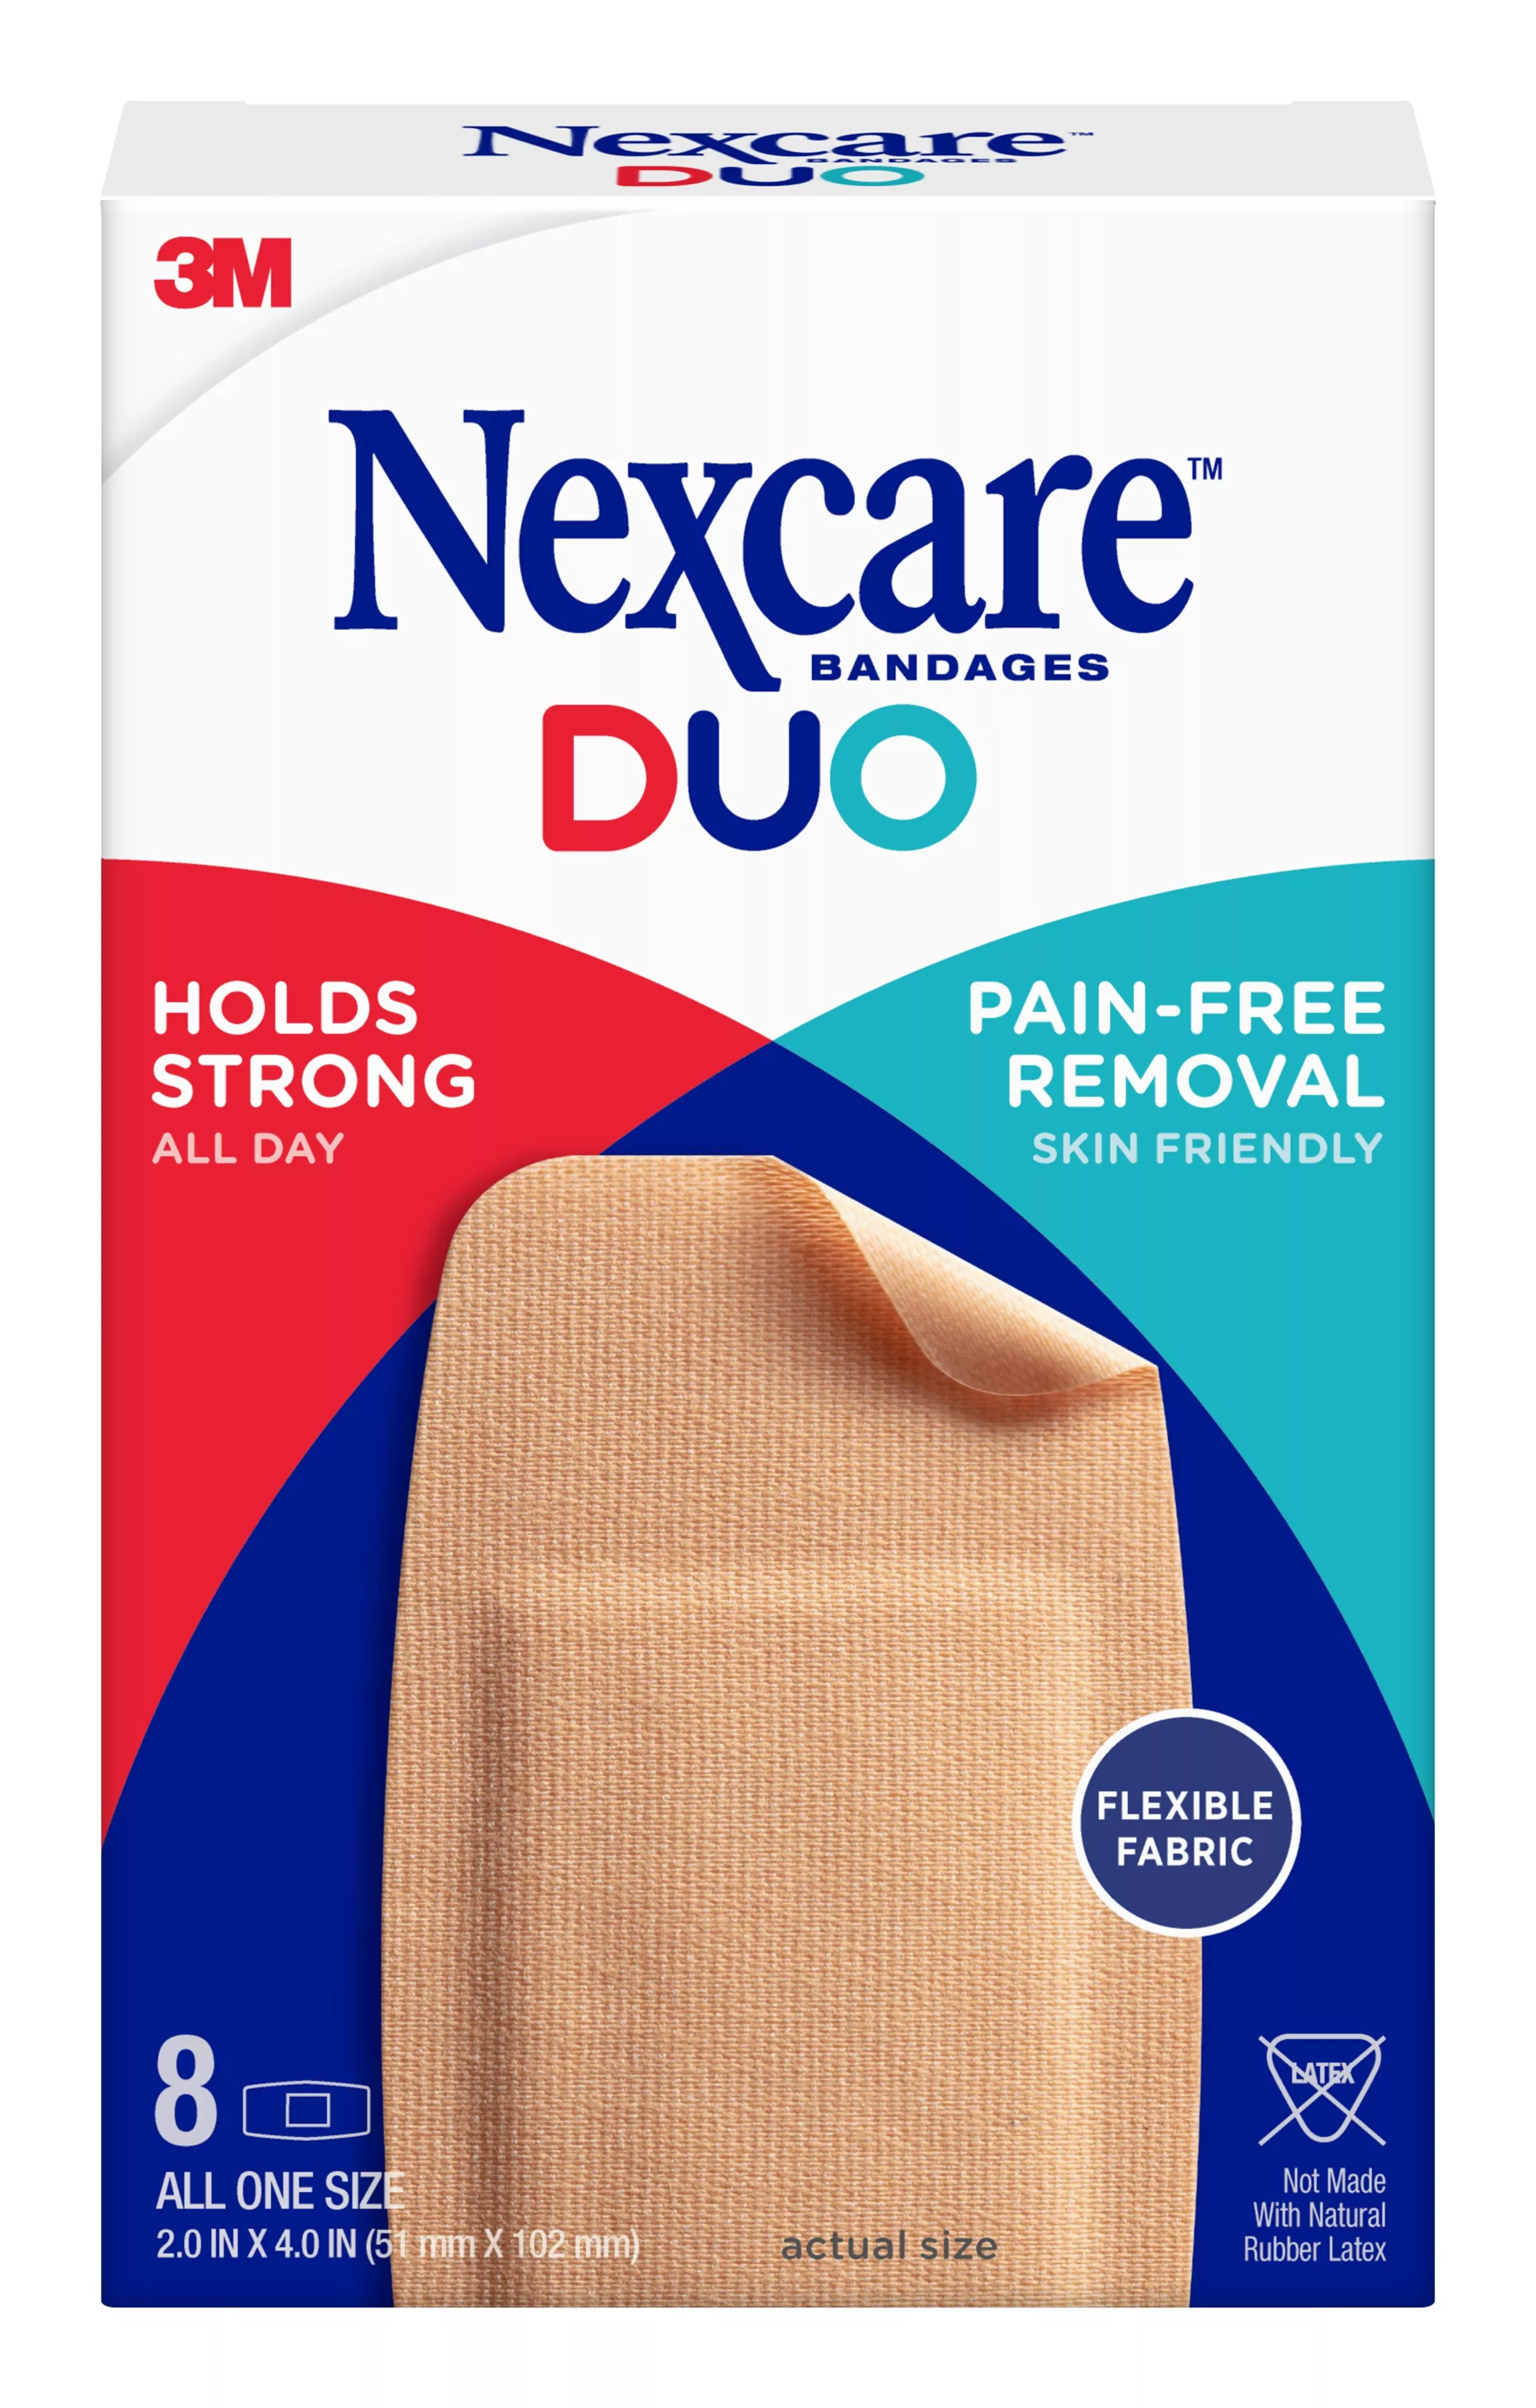 Nexcare™ DUO Bandages DSA-8, Knee and Elbow, 8 ct